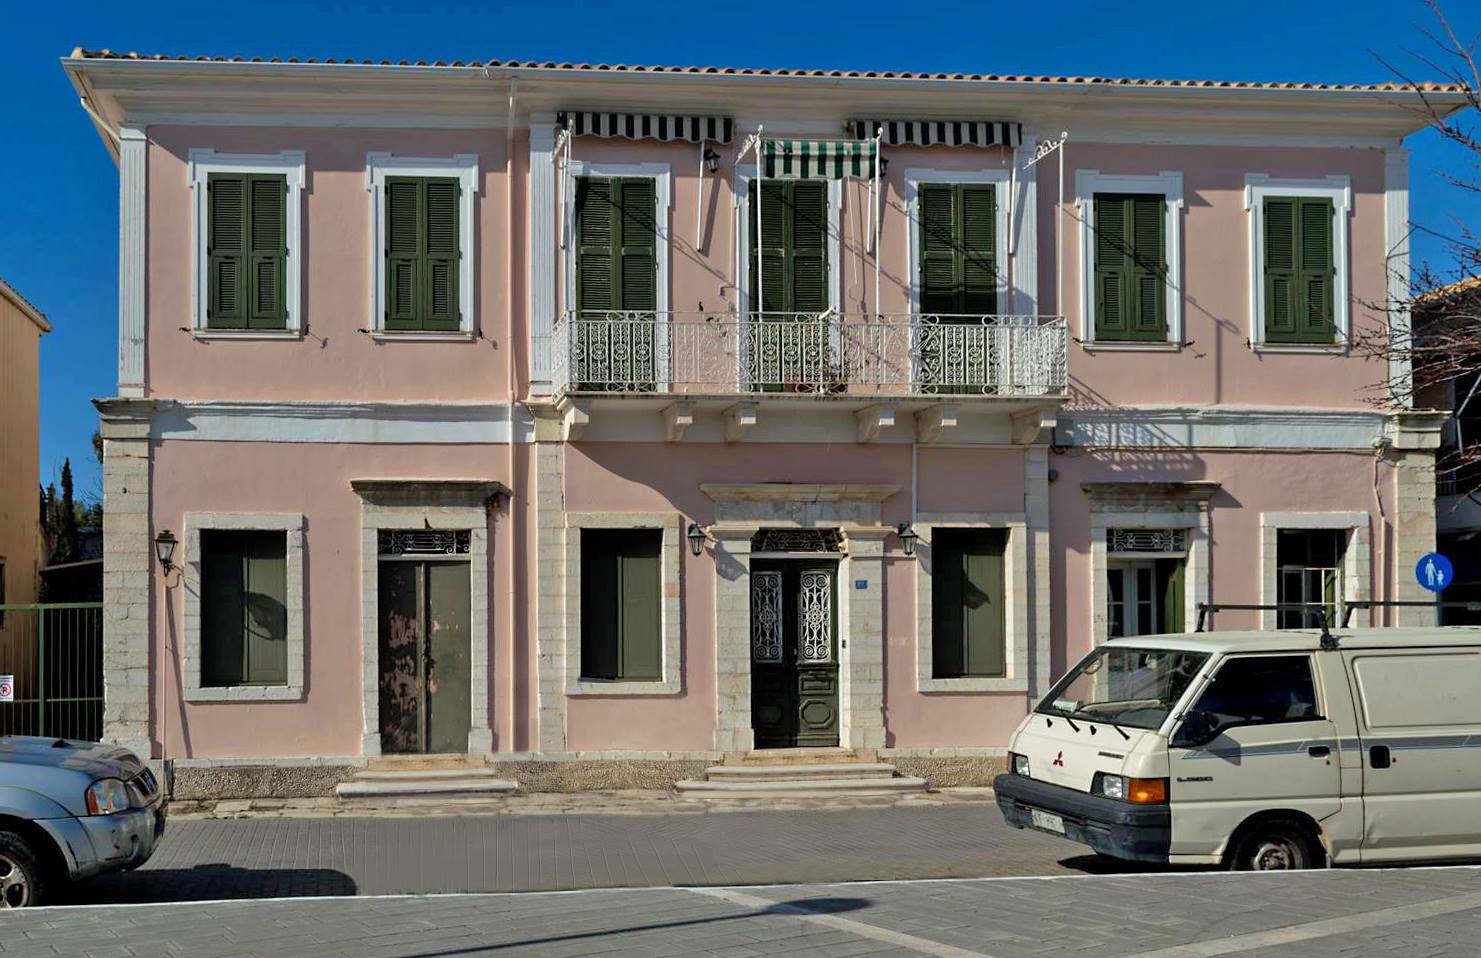 Lefkada town | Old building on the periphery of Zampelios Square | Architecture